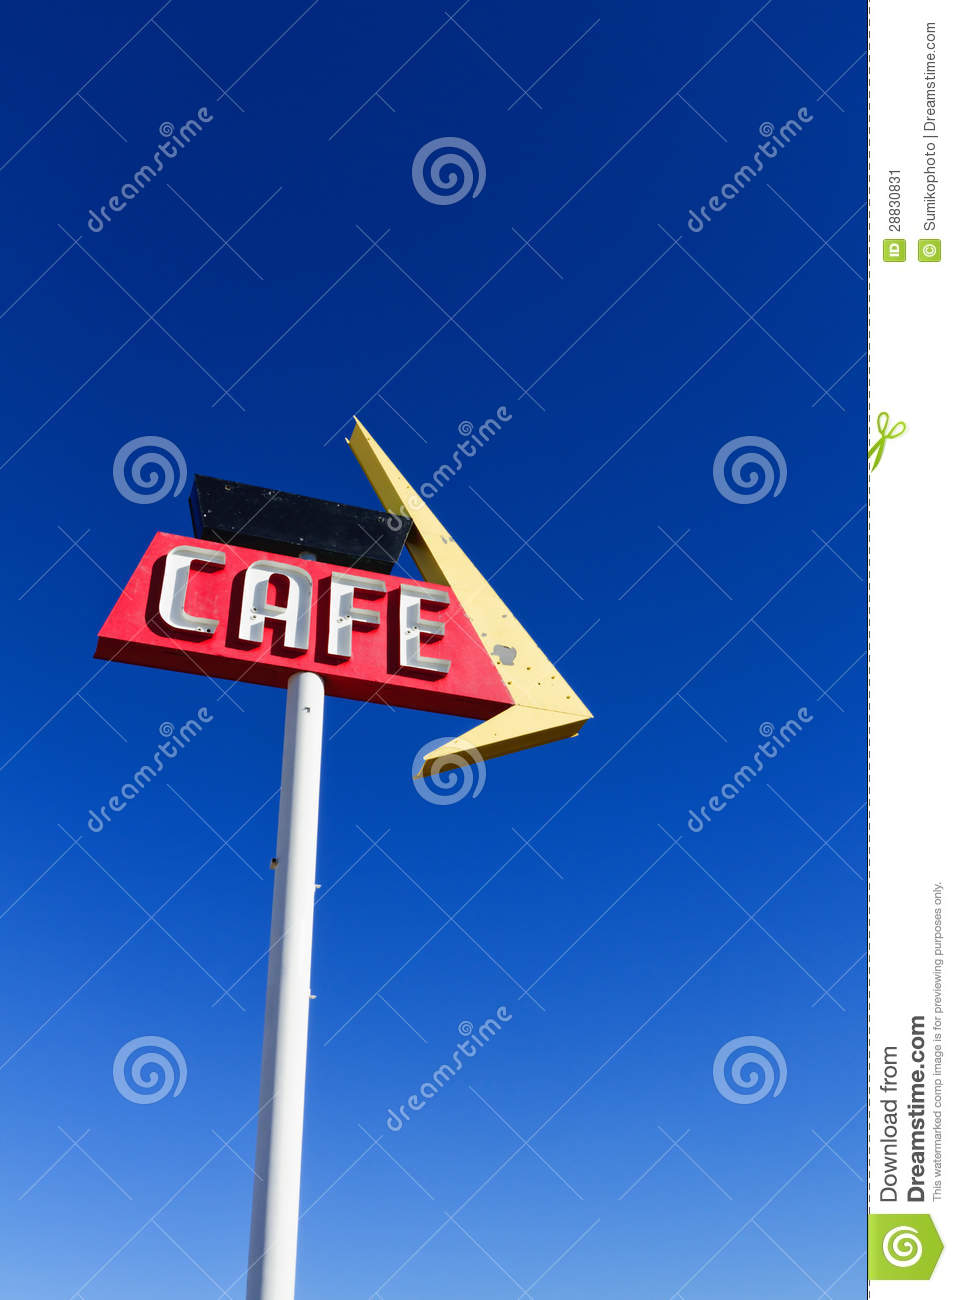 Cafe Sign On Route 66 Stock Image   Image  28830831